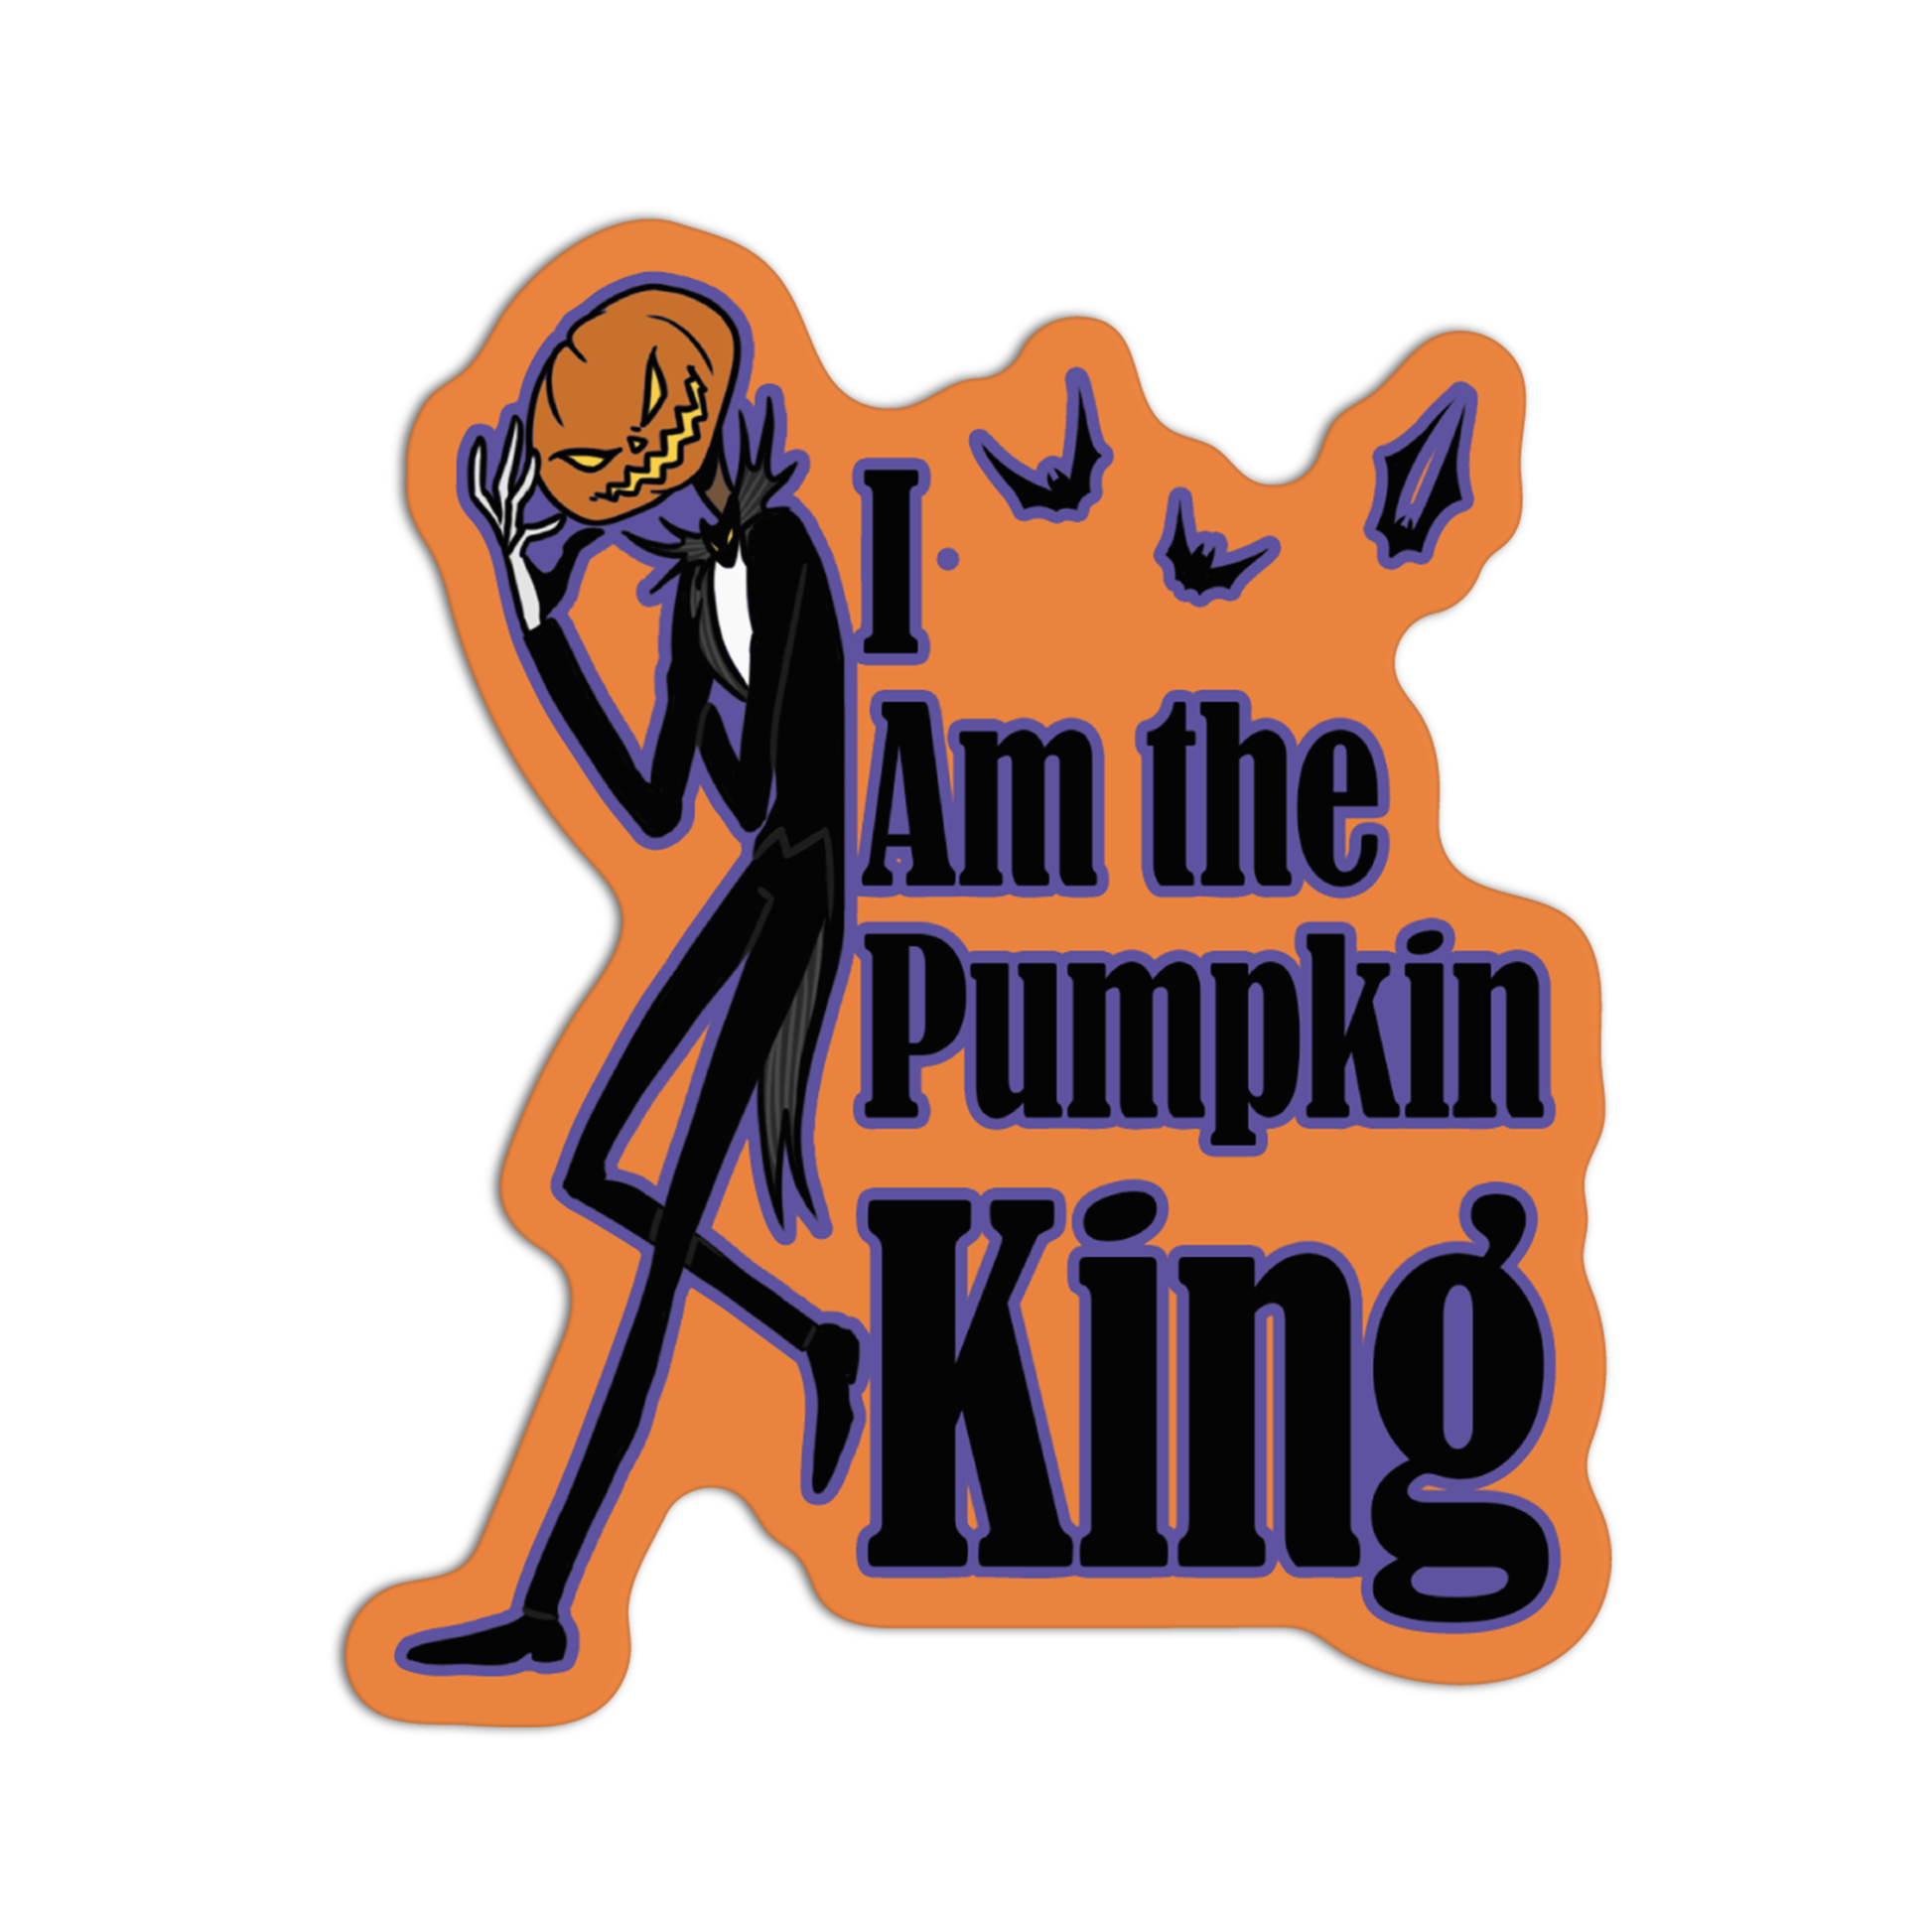 Pumpkin King’s Night Out